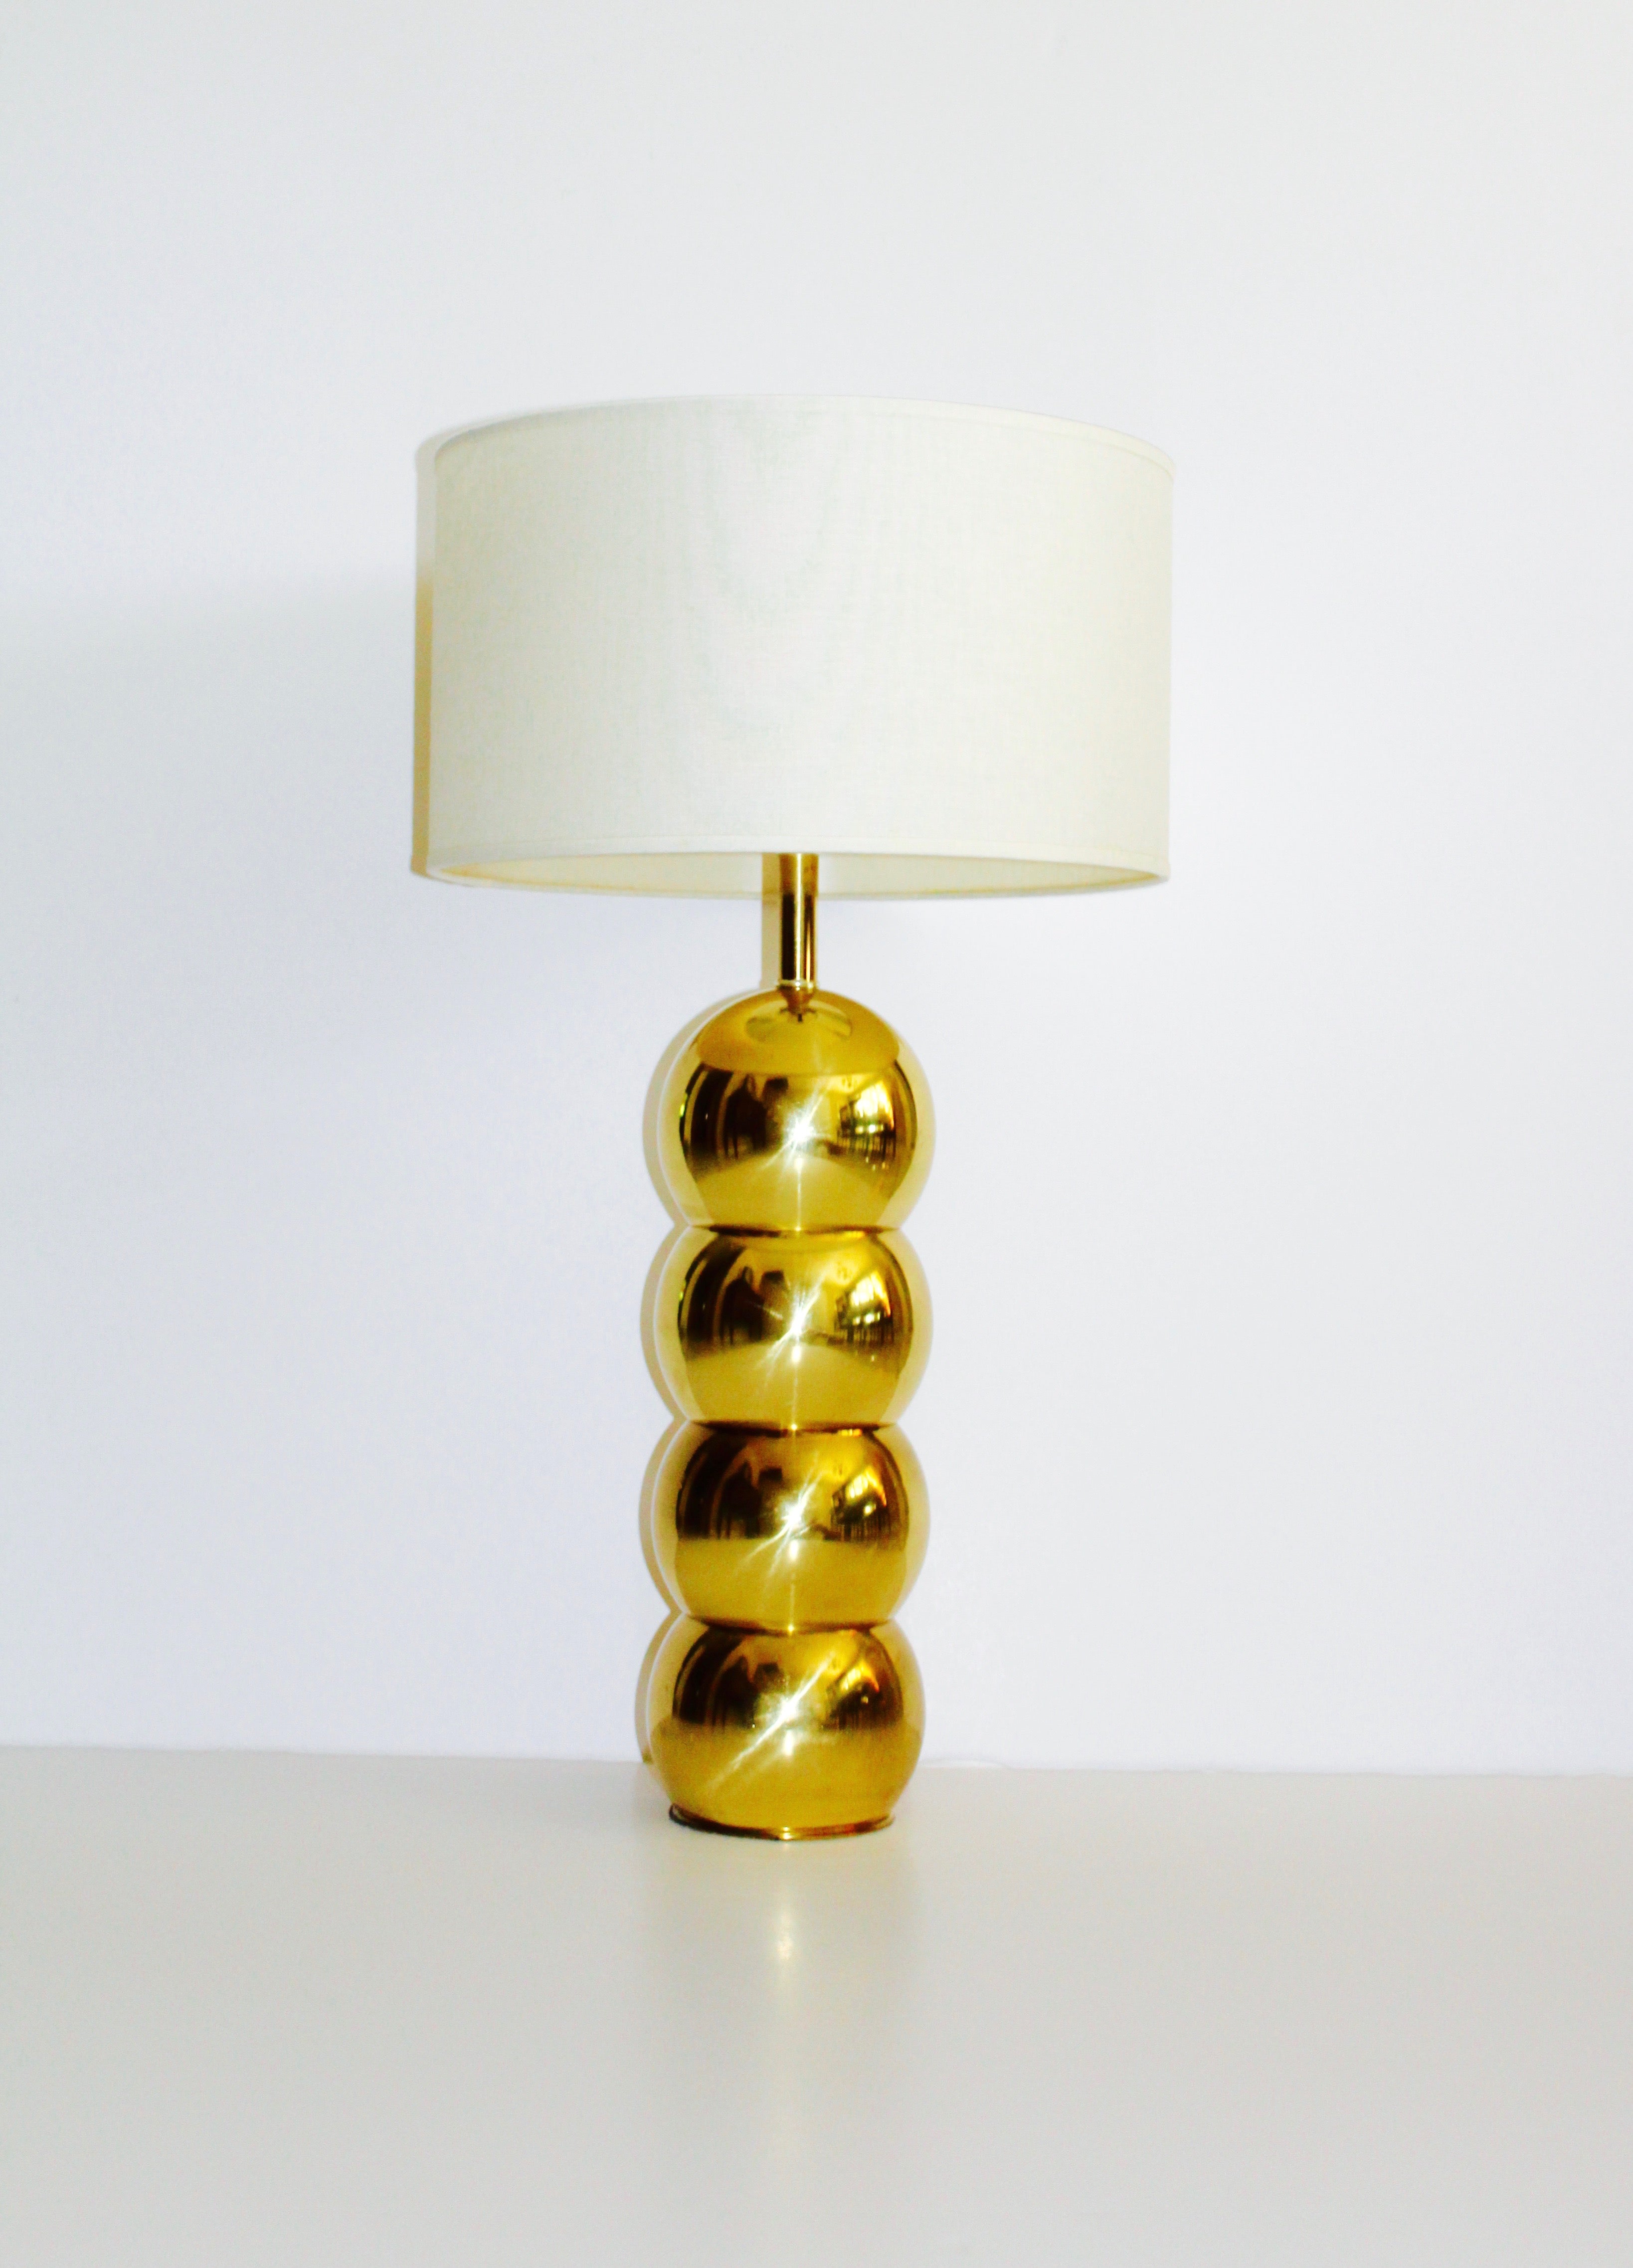 Chic Mid-Century Modern brass metal lamp with Space Age design. Comprised of four stacked brass balls or globes with caterpillar form. Fitted with linen drum shade in off-white.